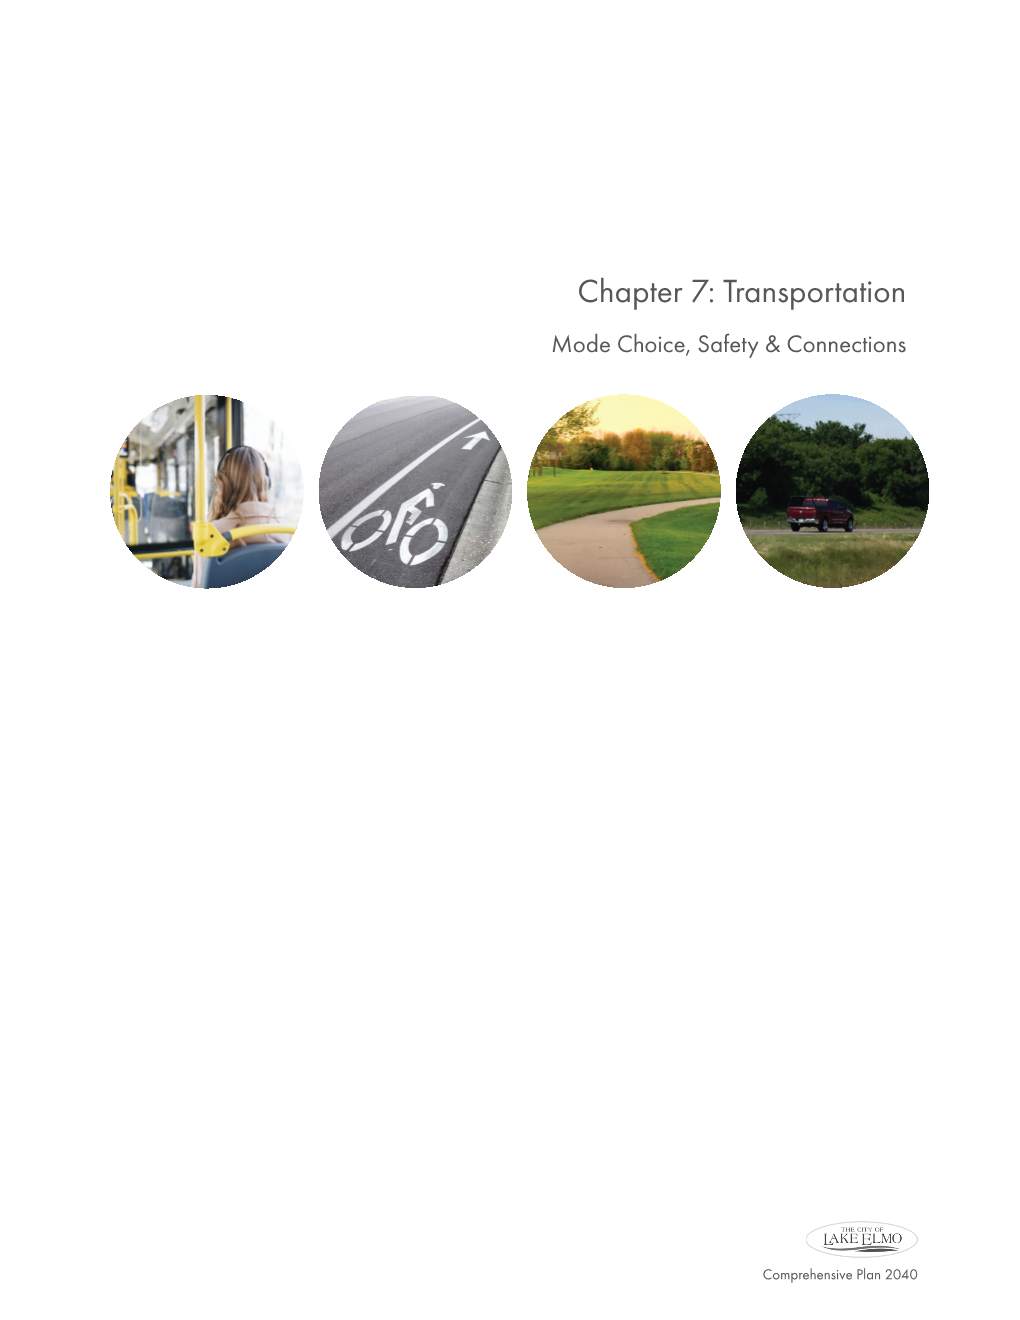 Chapter 7: Transportation Mode Choice, Safety & Connections